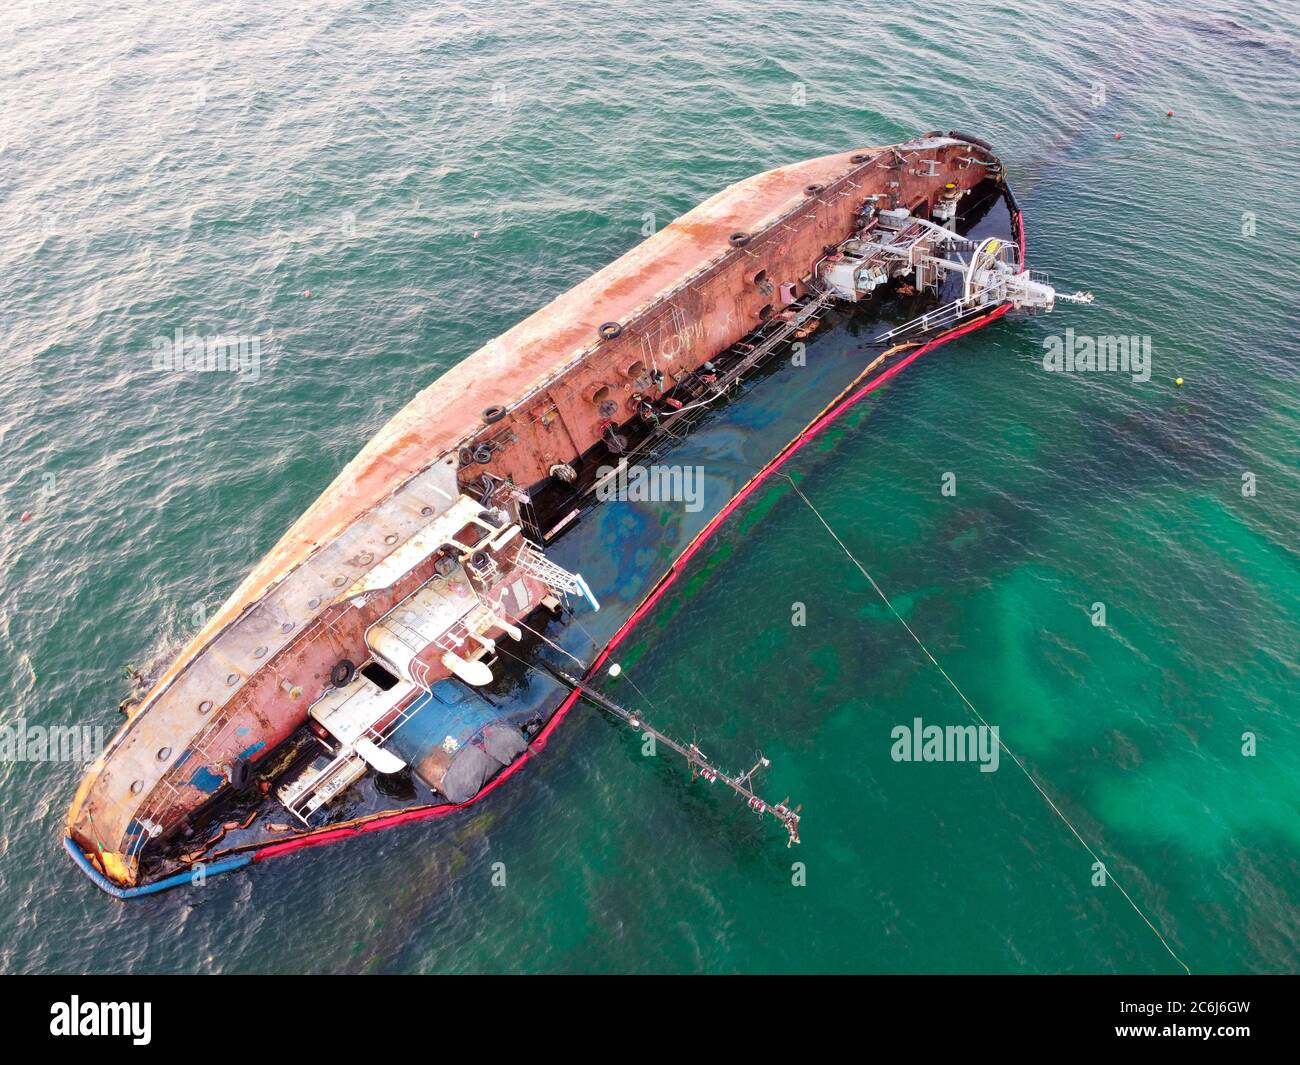 A tanker that sank on the seashore, an environmental catastrophe, pollution of fuel and oil products of the shoreline at sea. Stock Photo